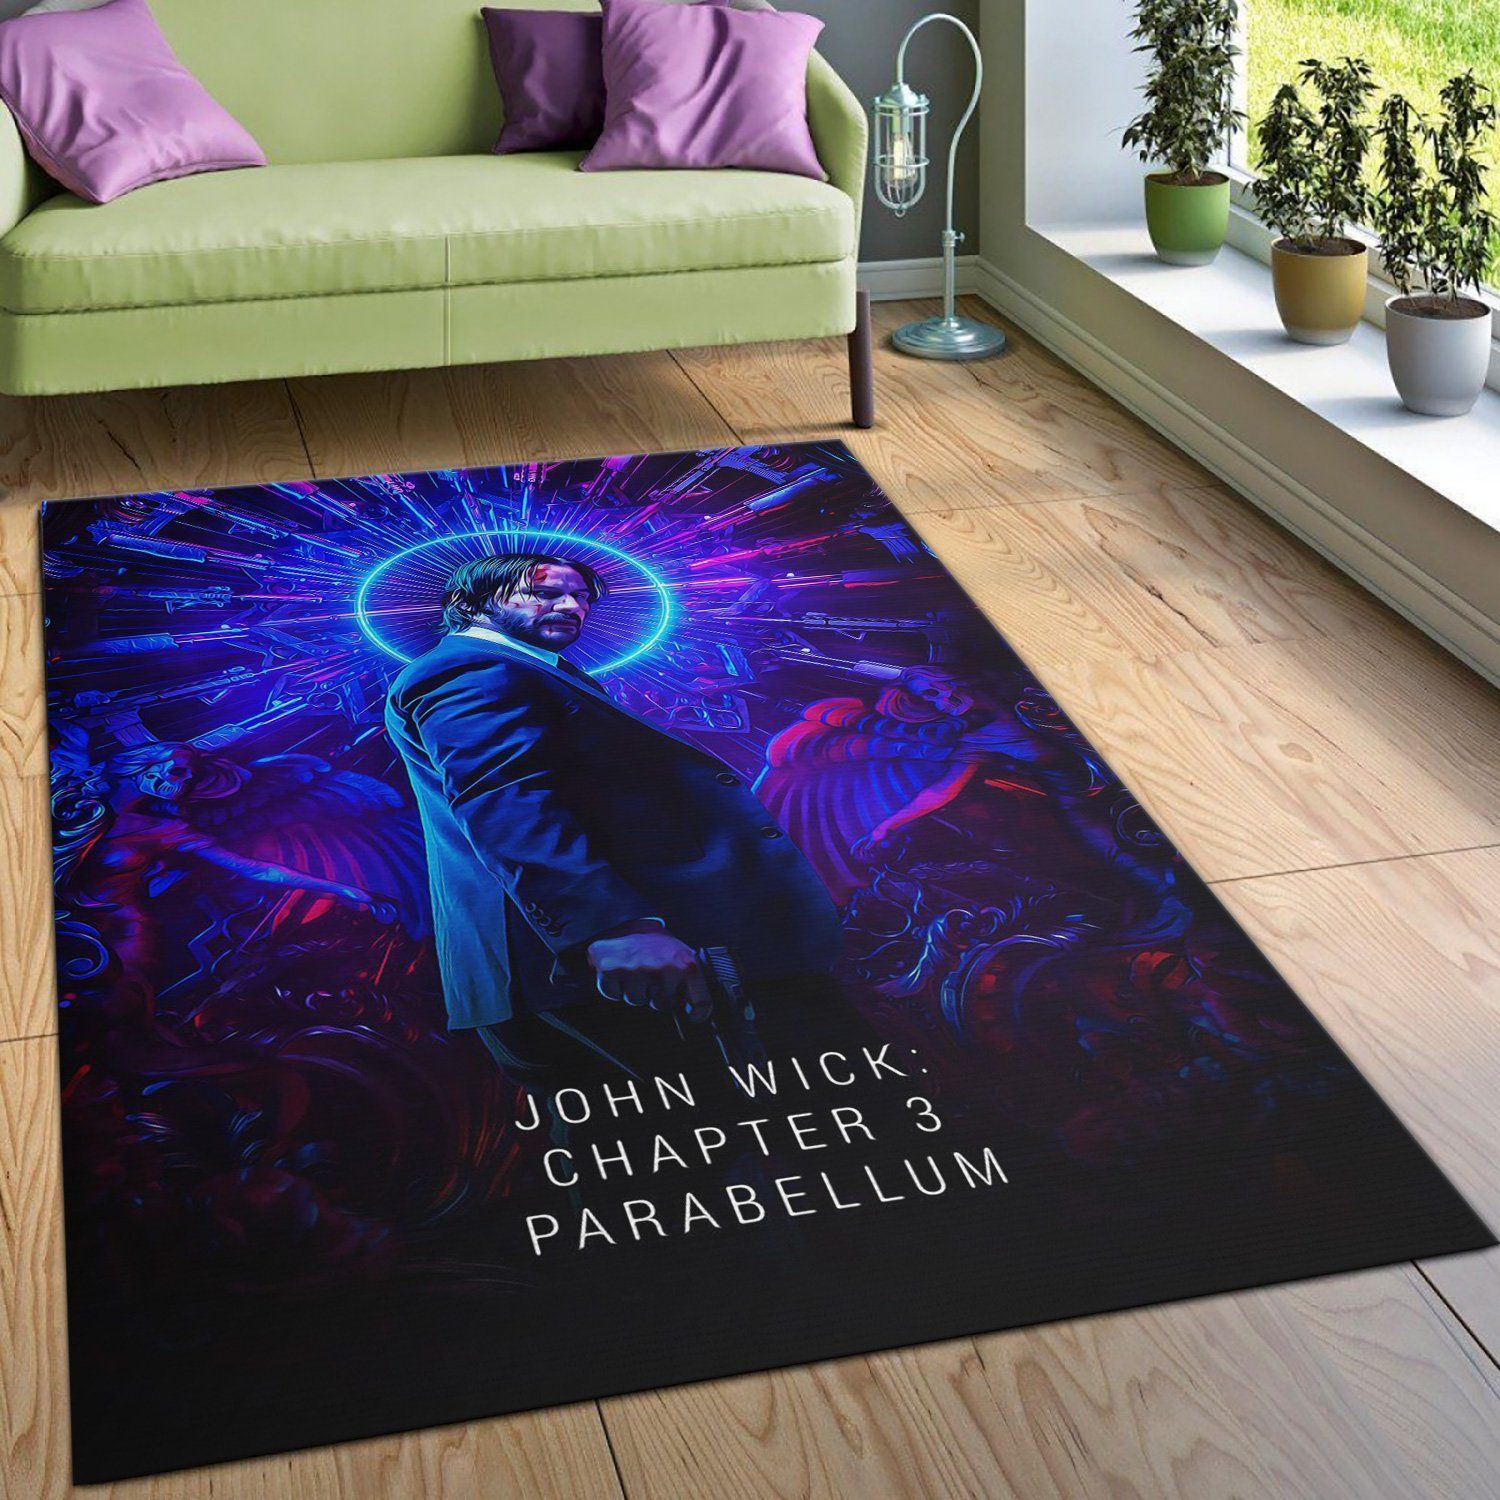 John Wick Chapter 3 2019 Area Rug Art Painting Movie Rugs Home US Decor - Indoor Outdoor Rugs 3